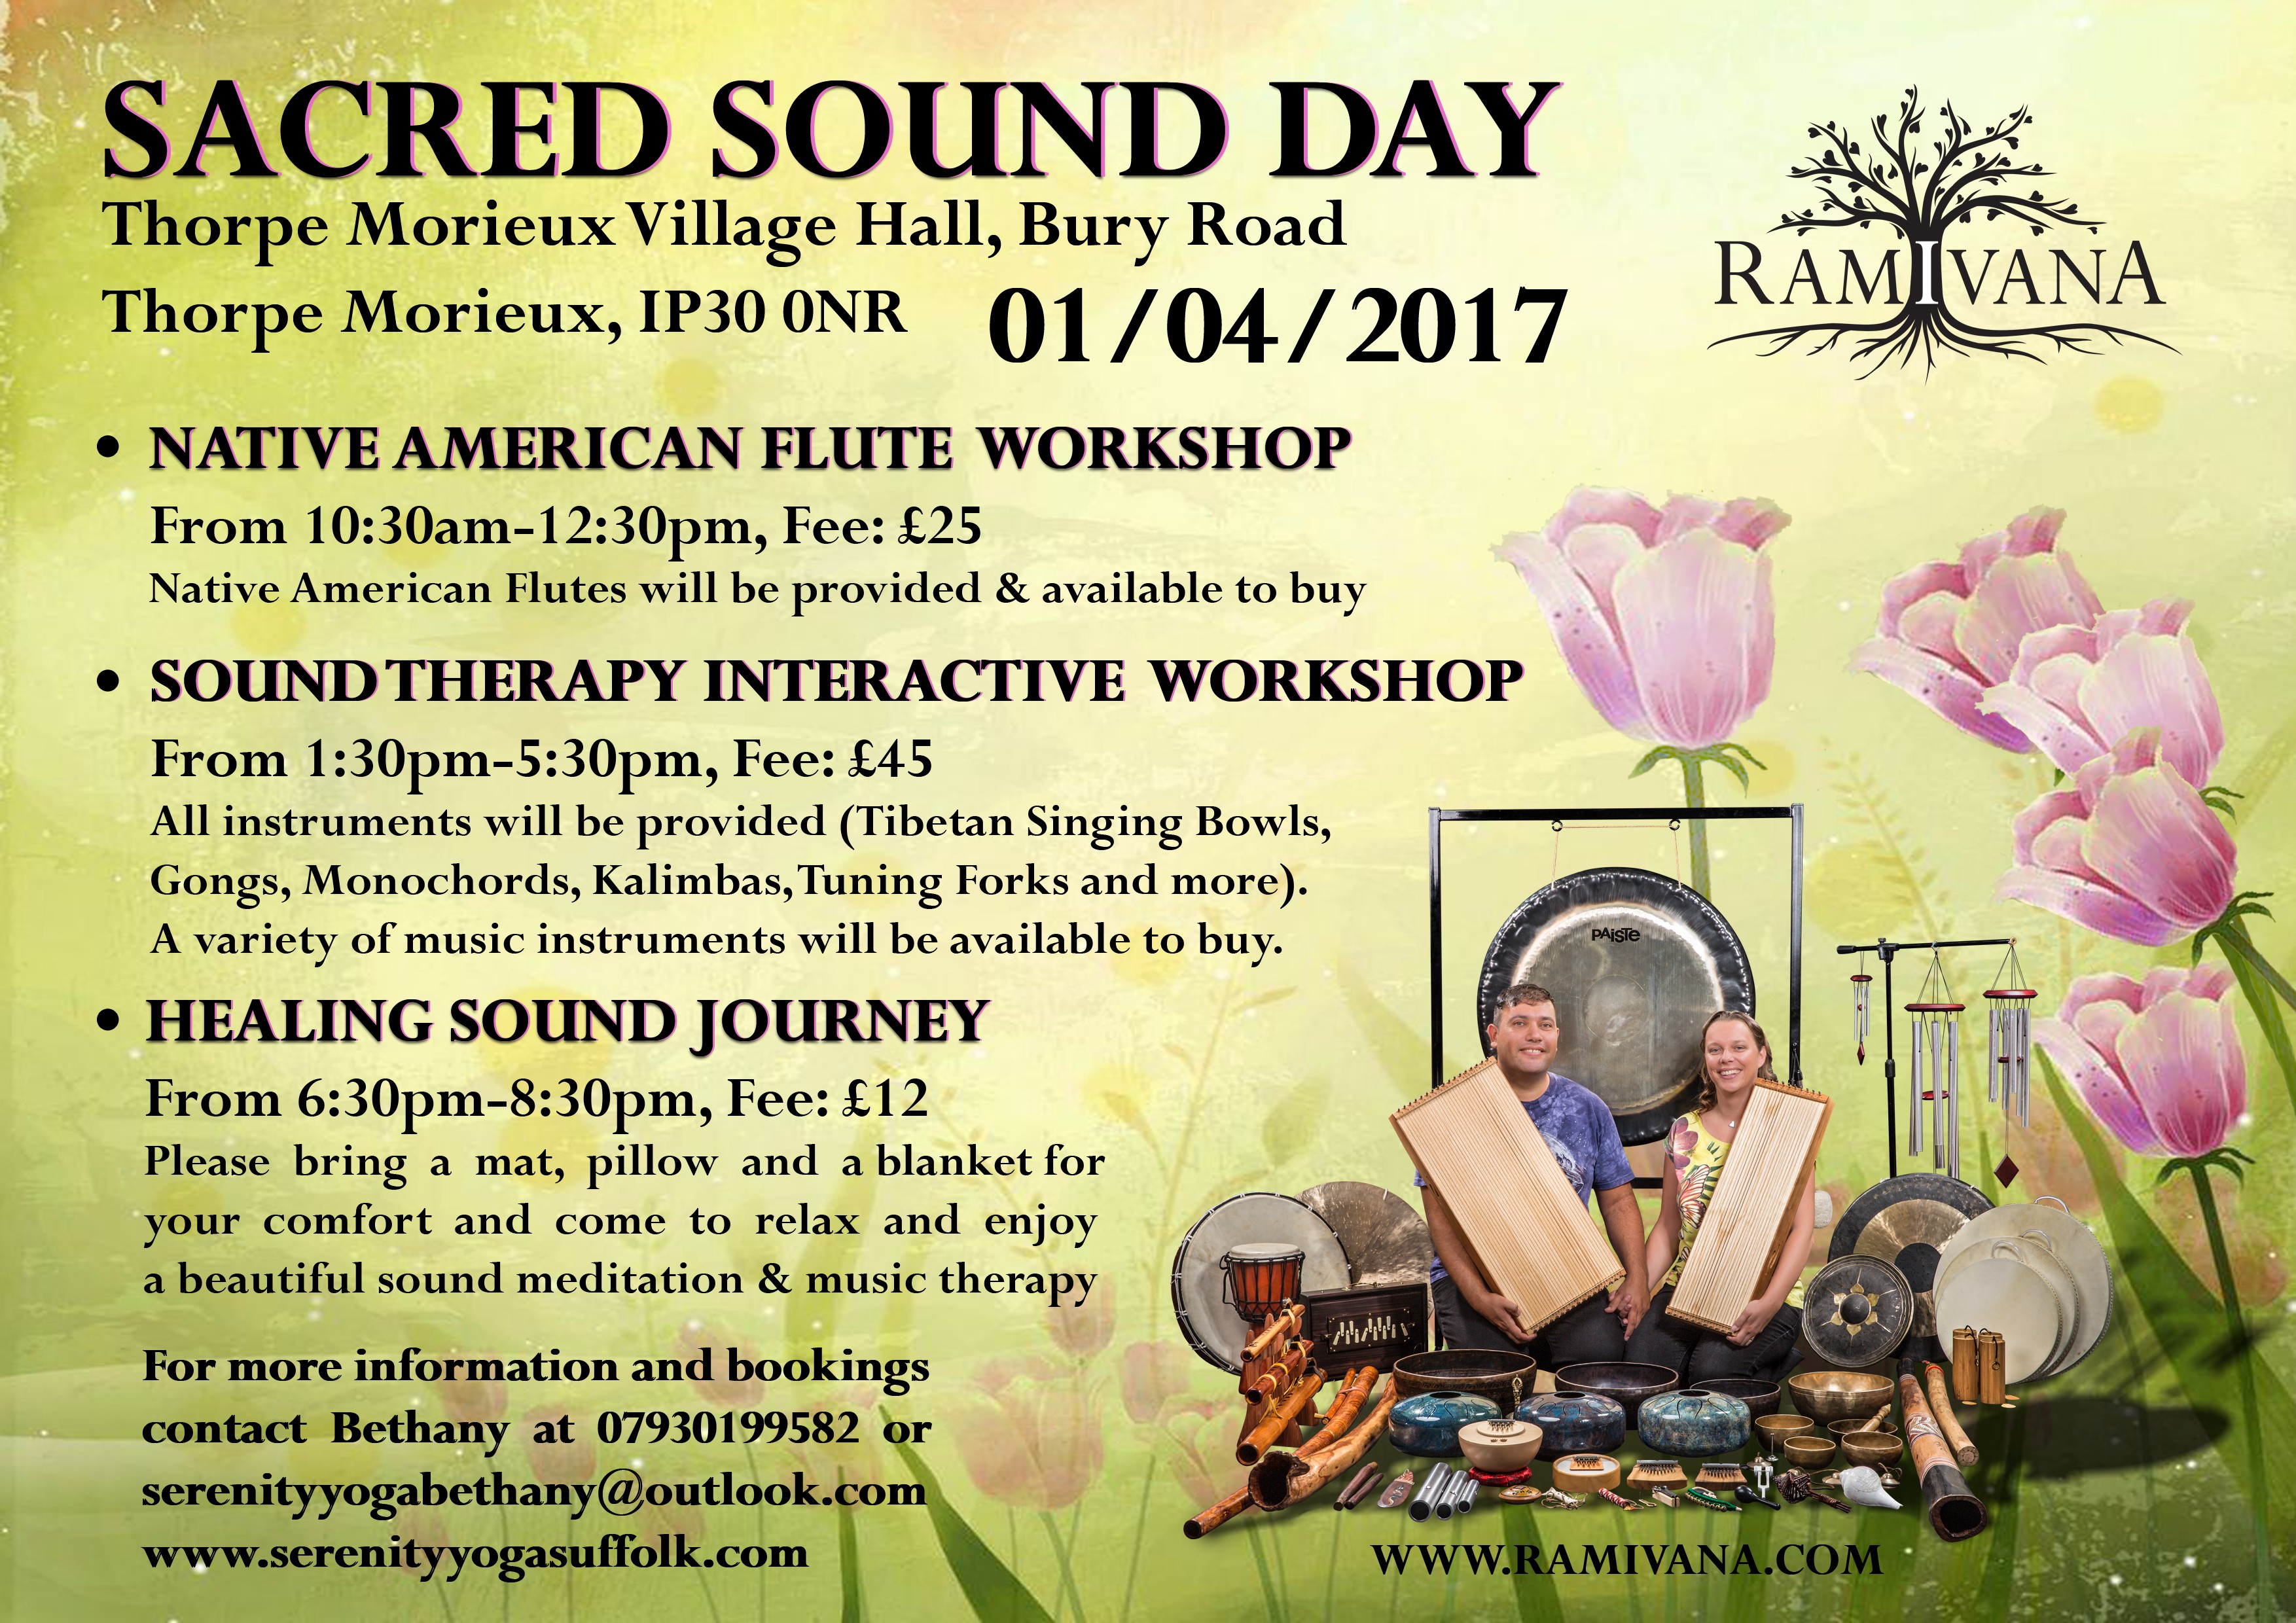 SUFFOLK - SACRED SOUND DAY SOUND THERAPY INTERACTIVE WORKHOP